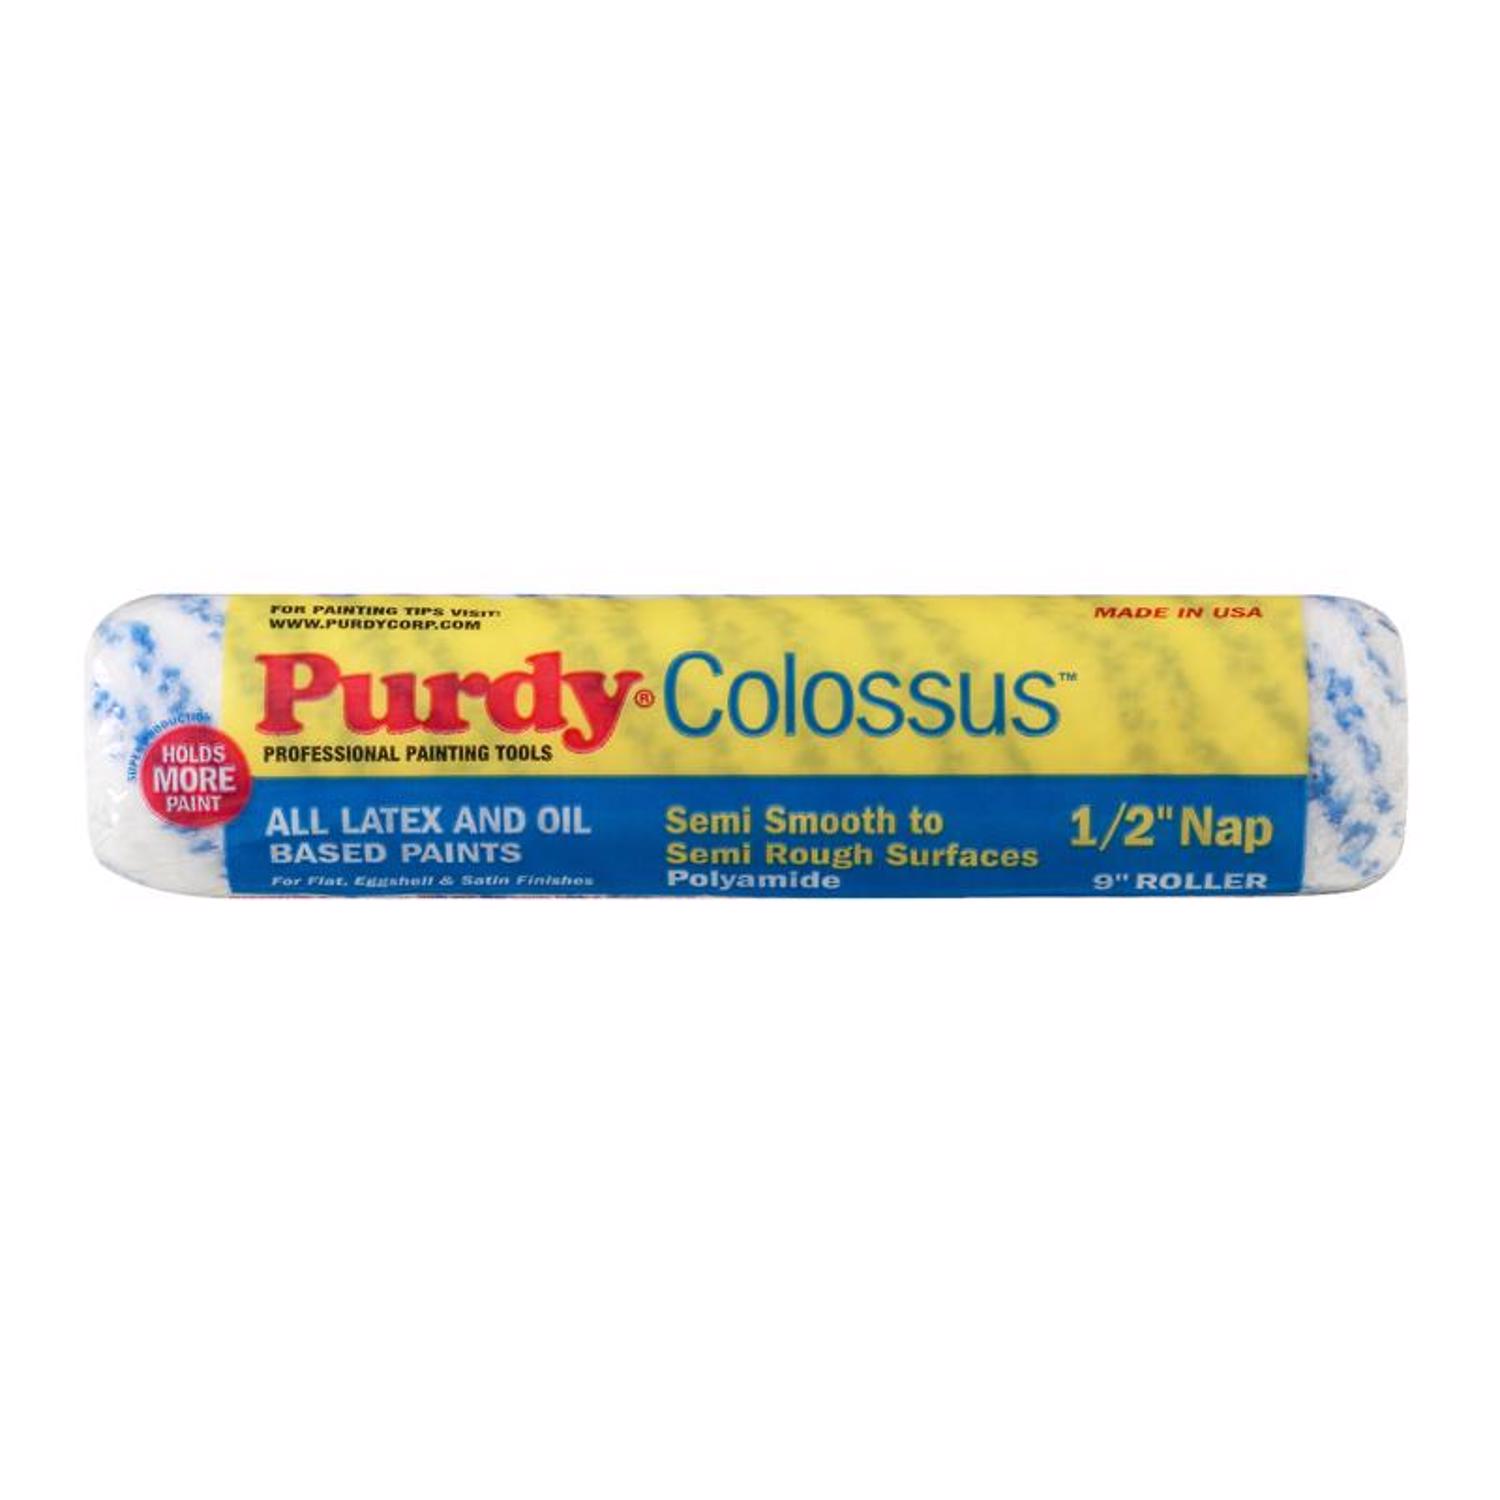 Photos - Putty Knife / Painting Tool Purdy Colossus Polyamide Fabric 9 in. W X 1/2 in. Paint Roller Cover 1 pk